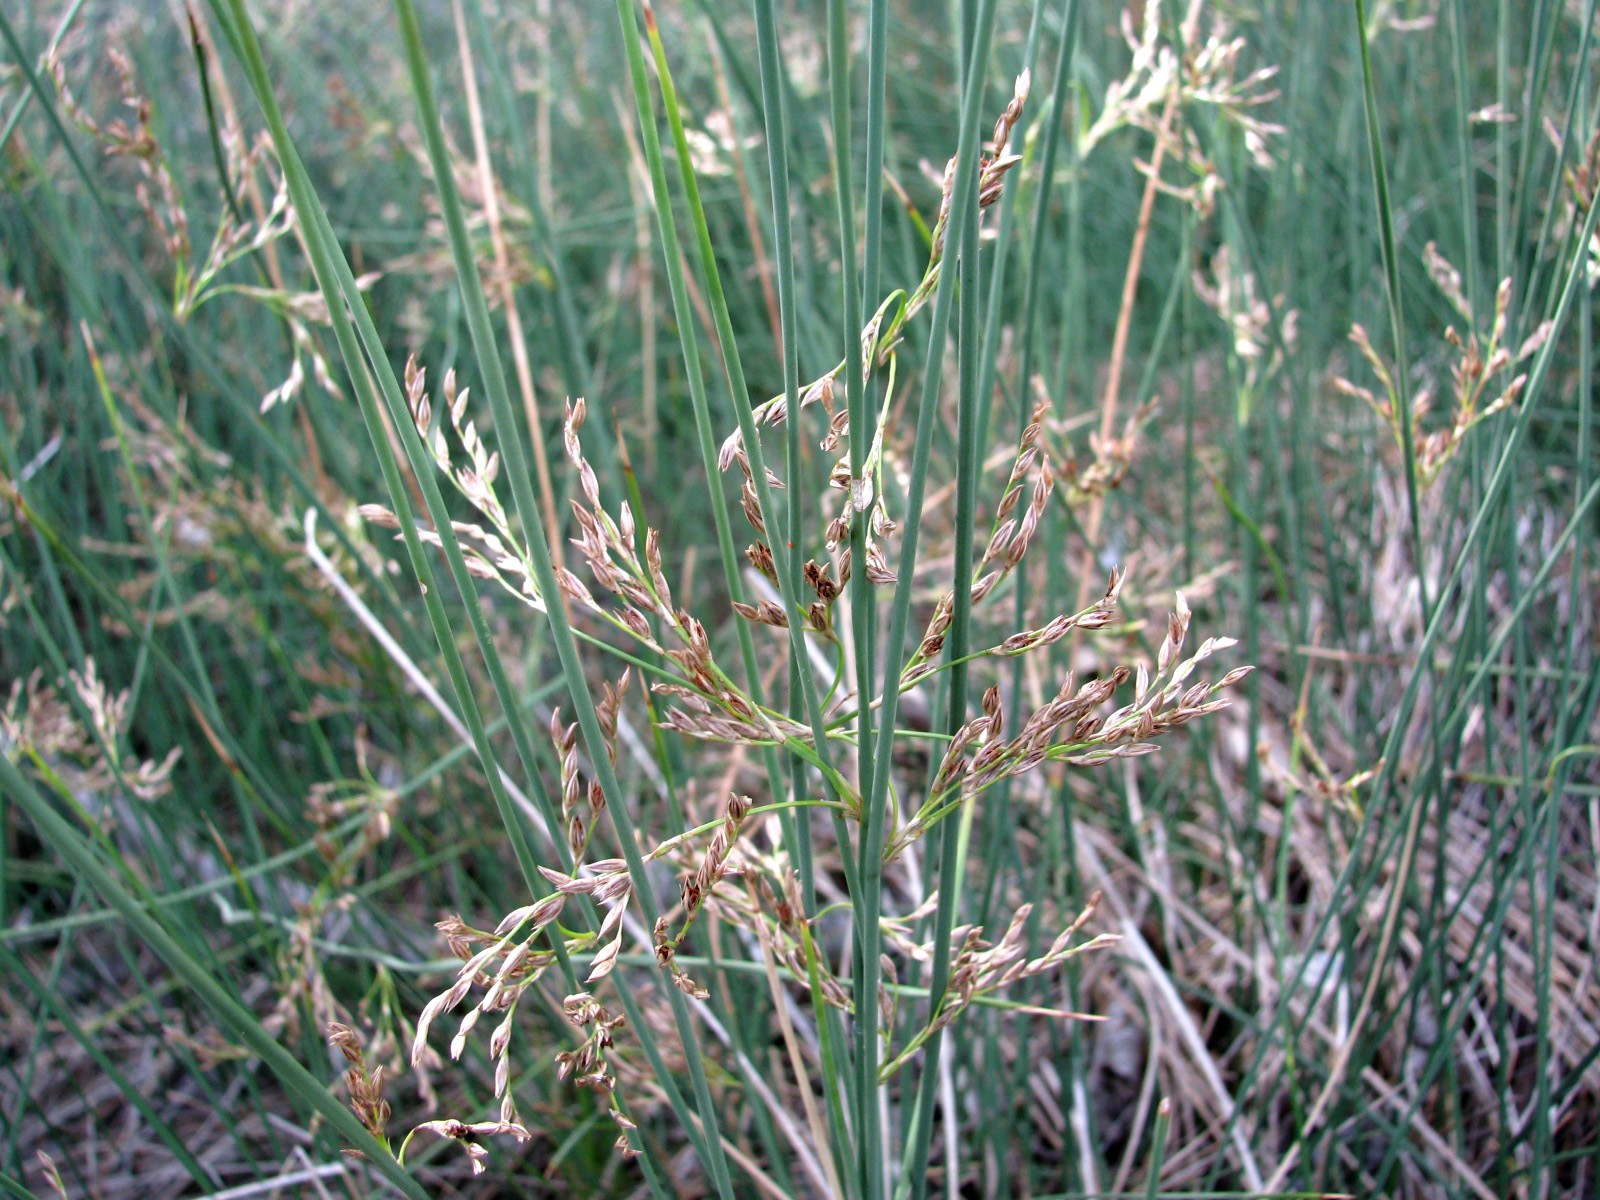 Growth habit: a cluster of rushes